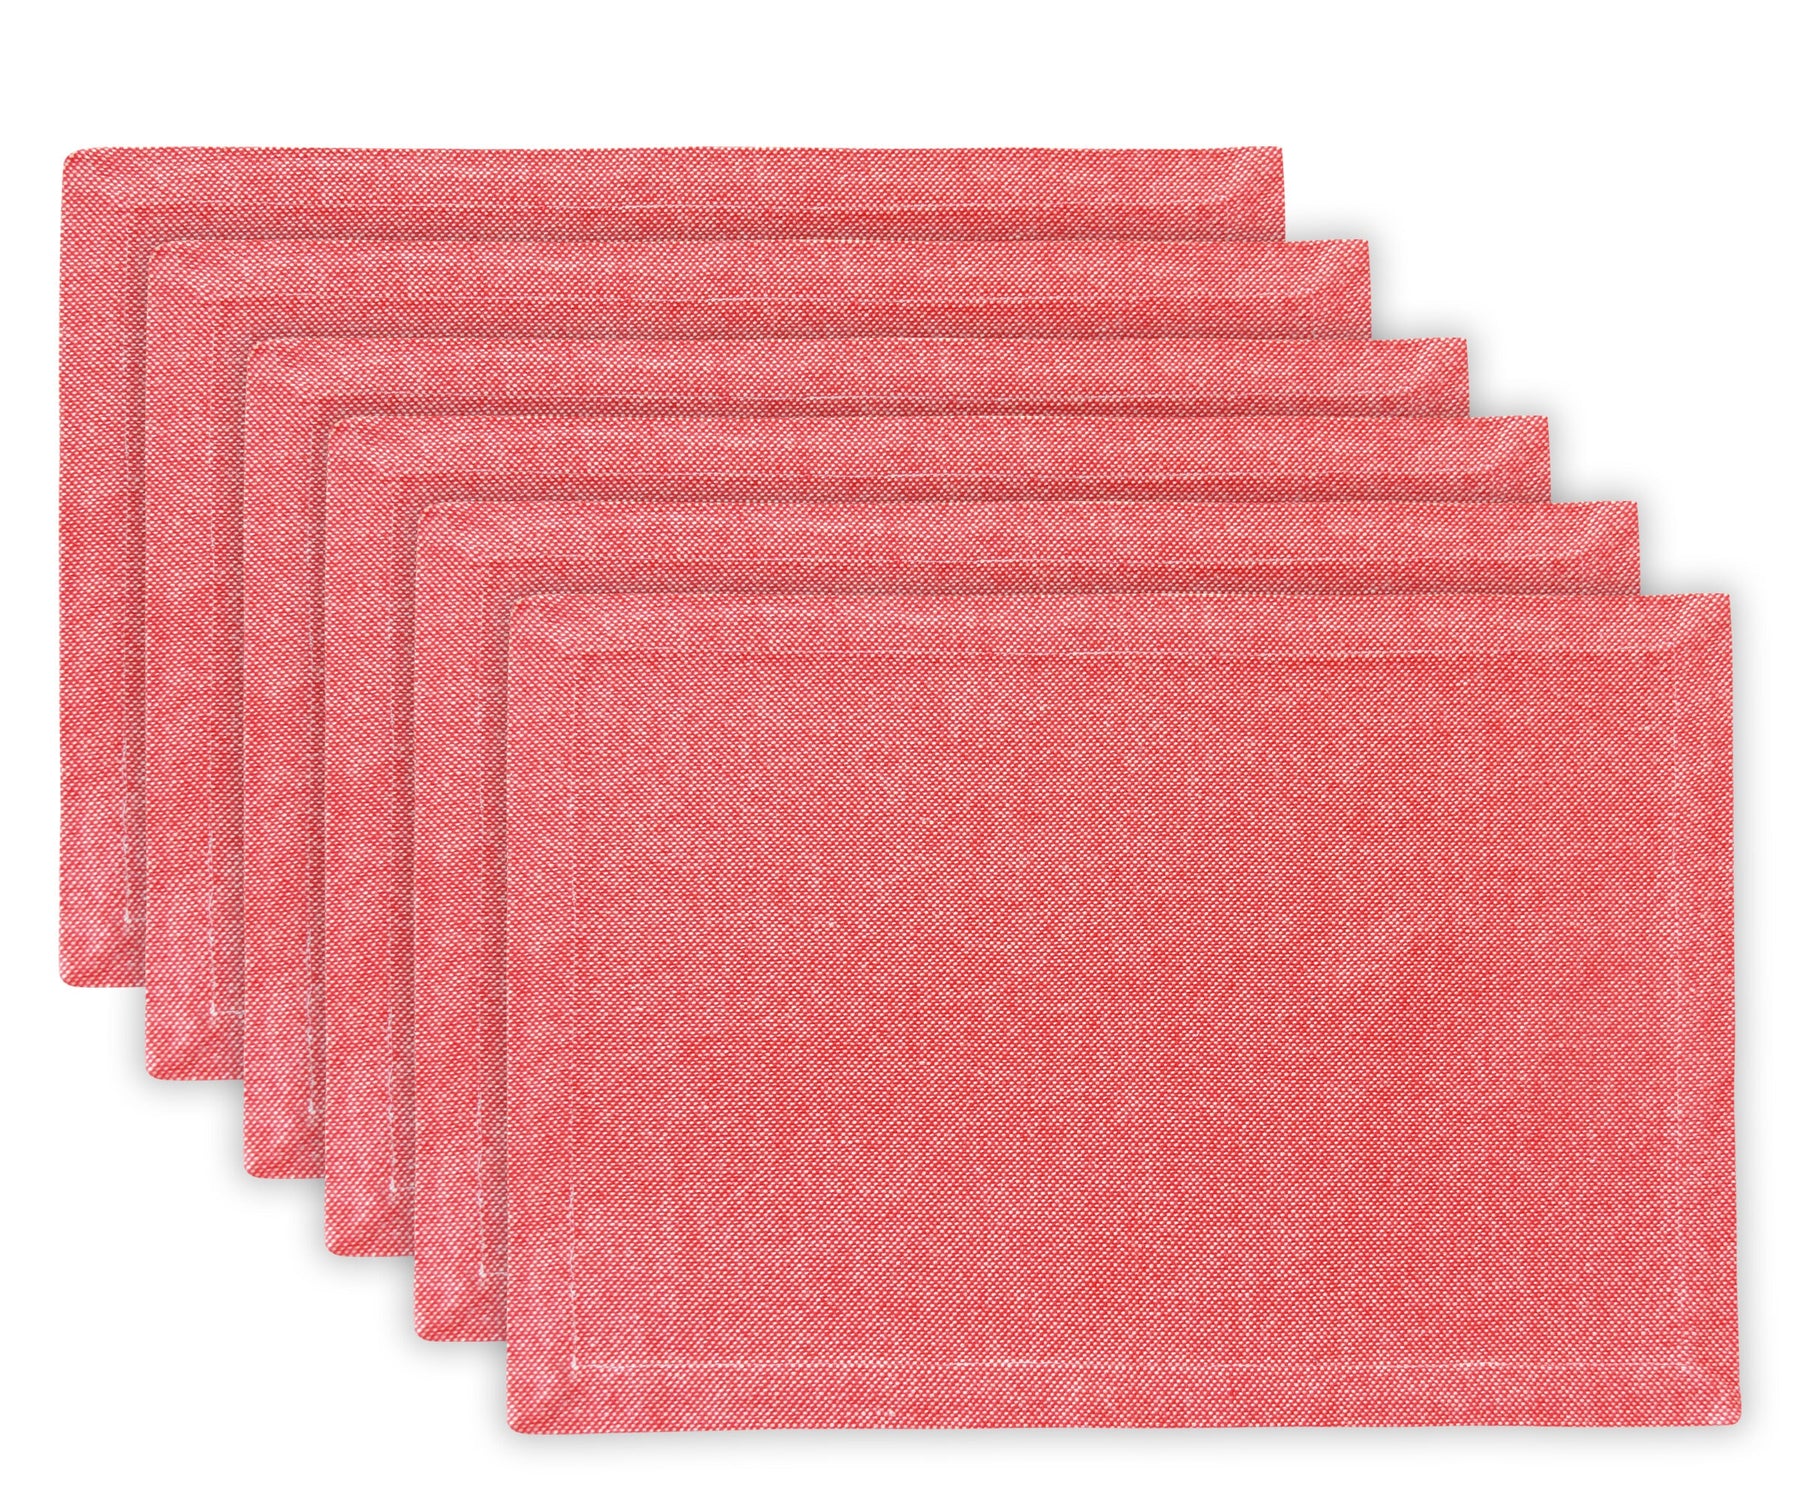  Enhance your dining table with vibrant red fabric placemats, combining elegance and protection for a delightful mealtime ambiance.